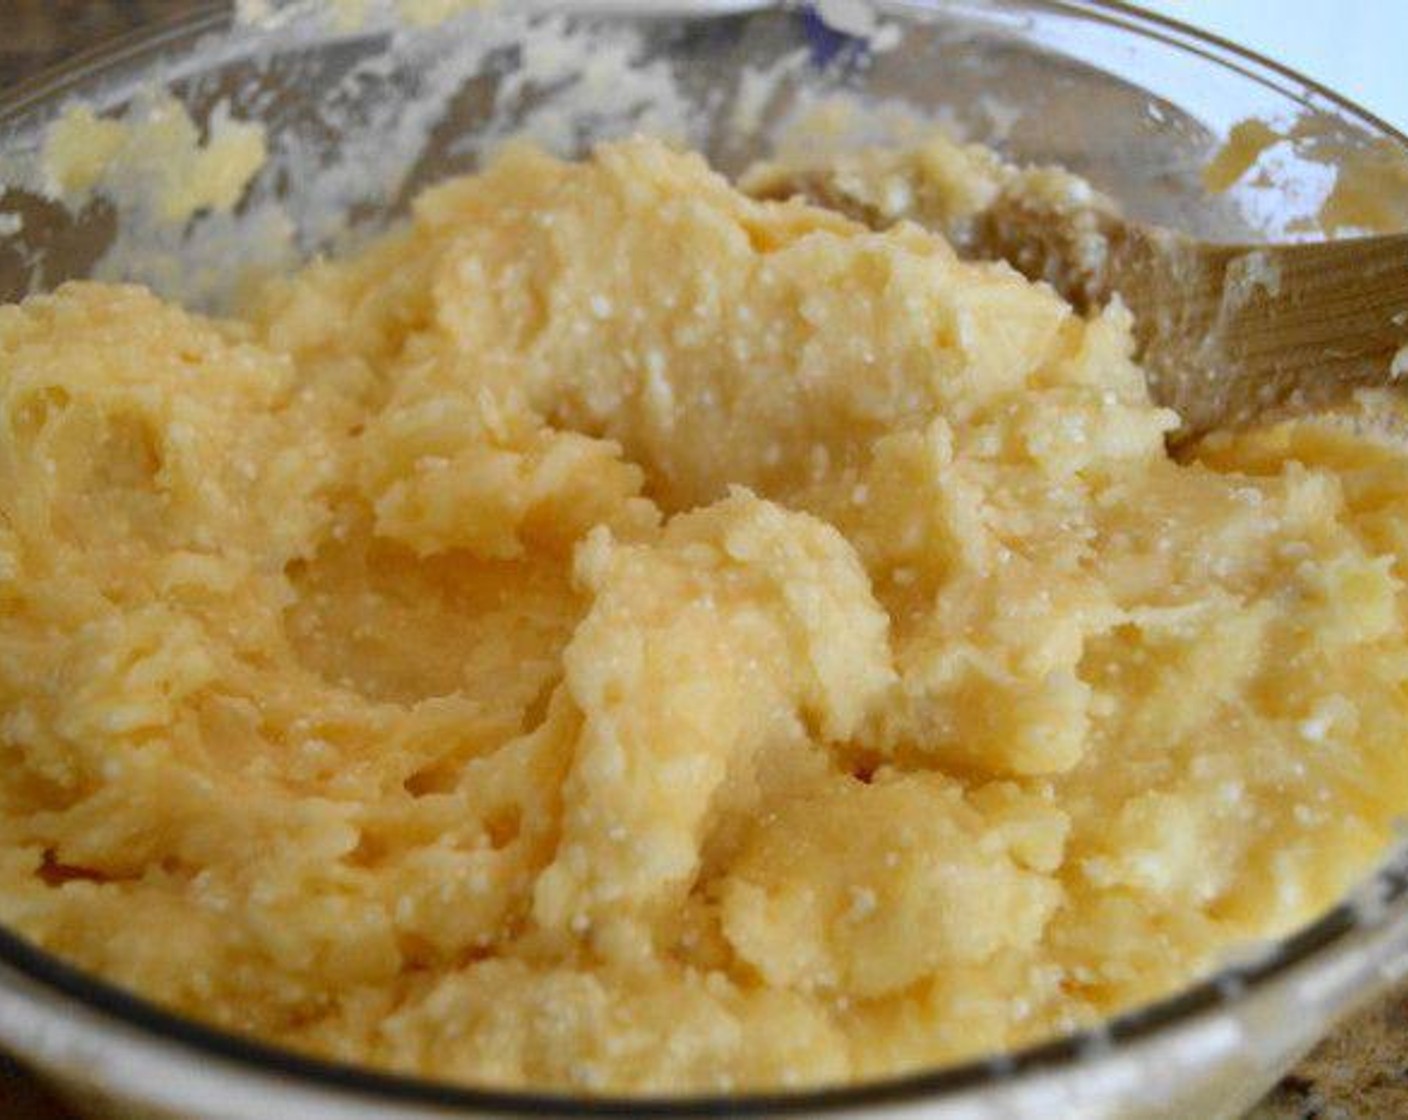 step 3 When the potatoes are done, it's time to make the filling. Remove them from the water with a slotted spoon and transfer them to a very large bowl, but do not drain the water. leaving the pot of water on the stove boiling.